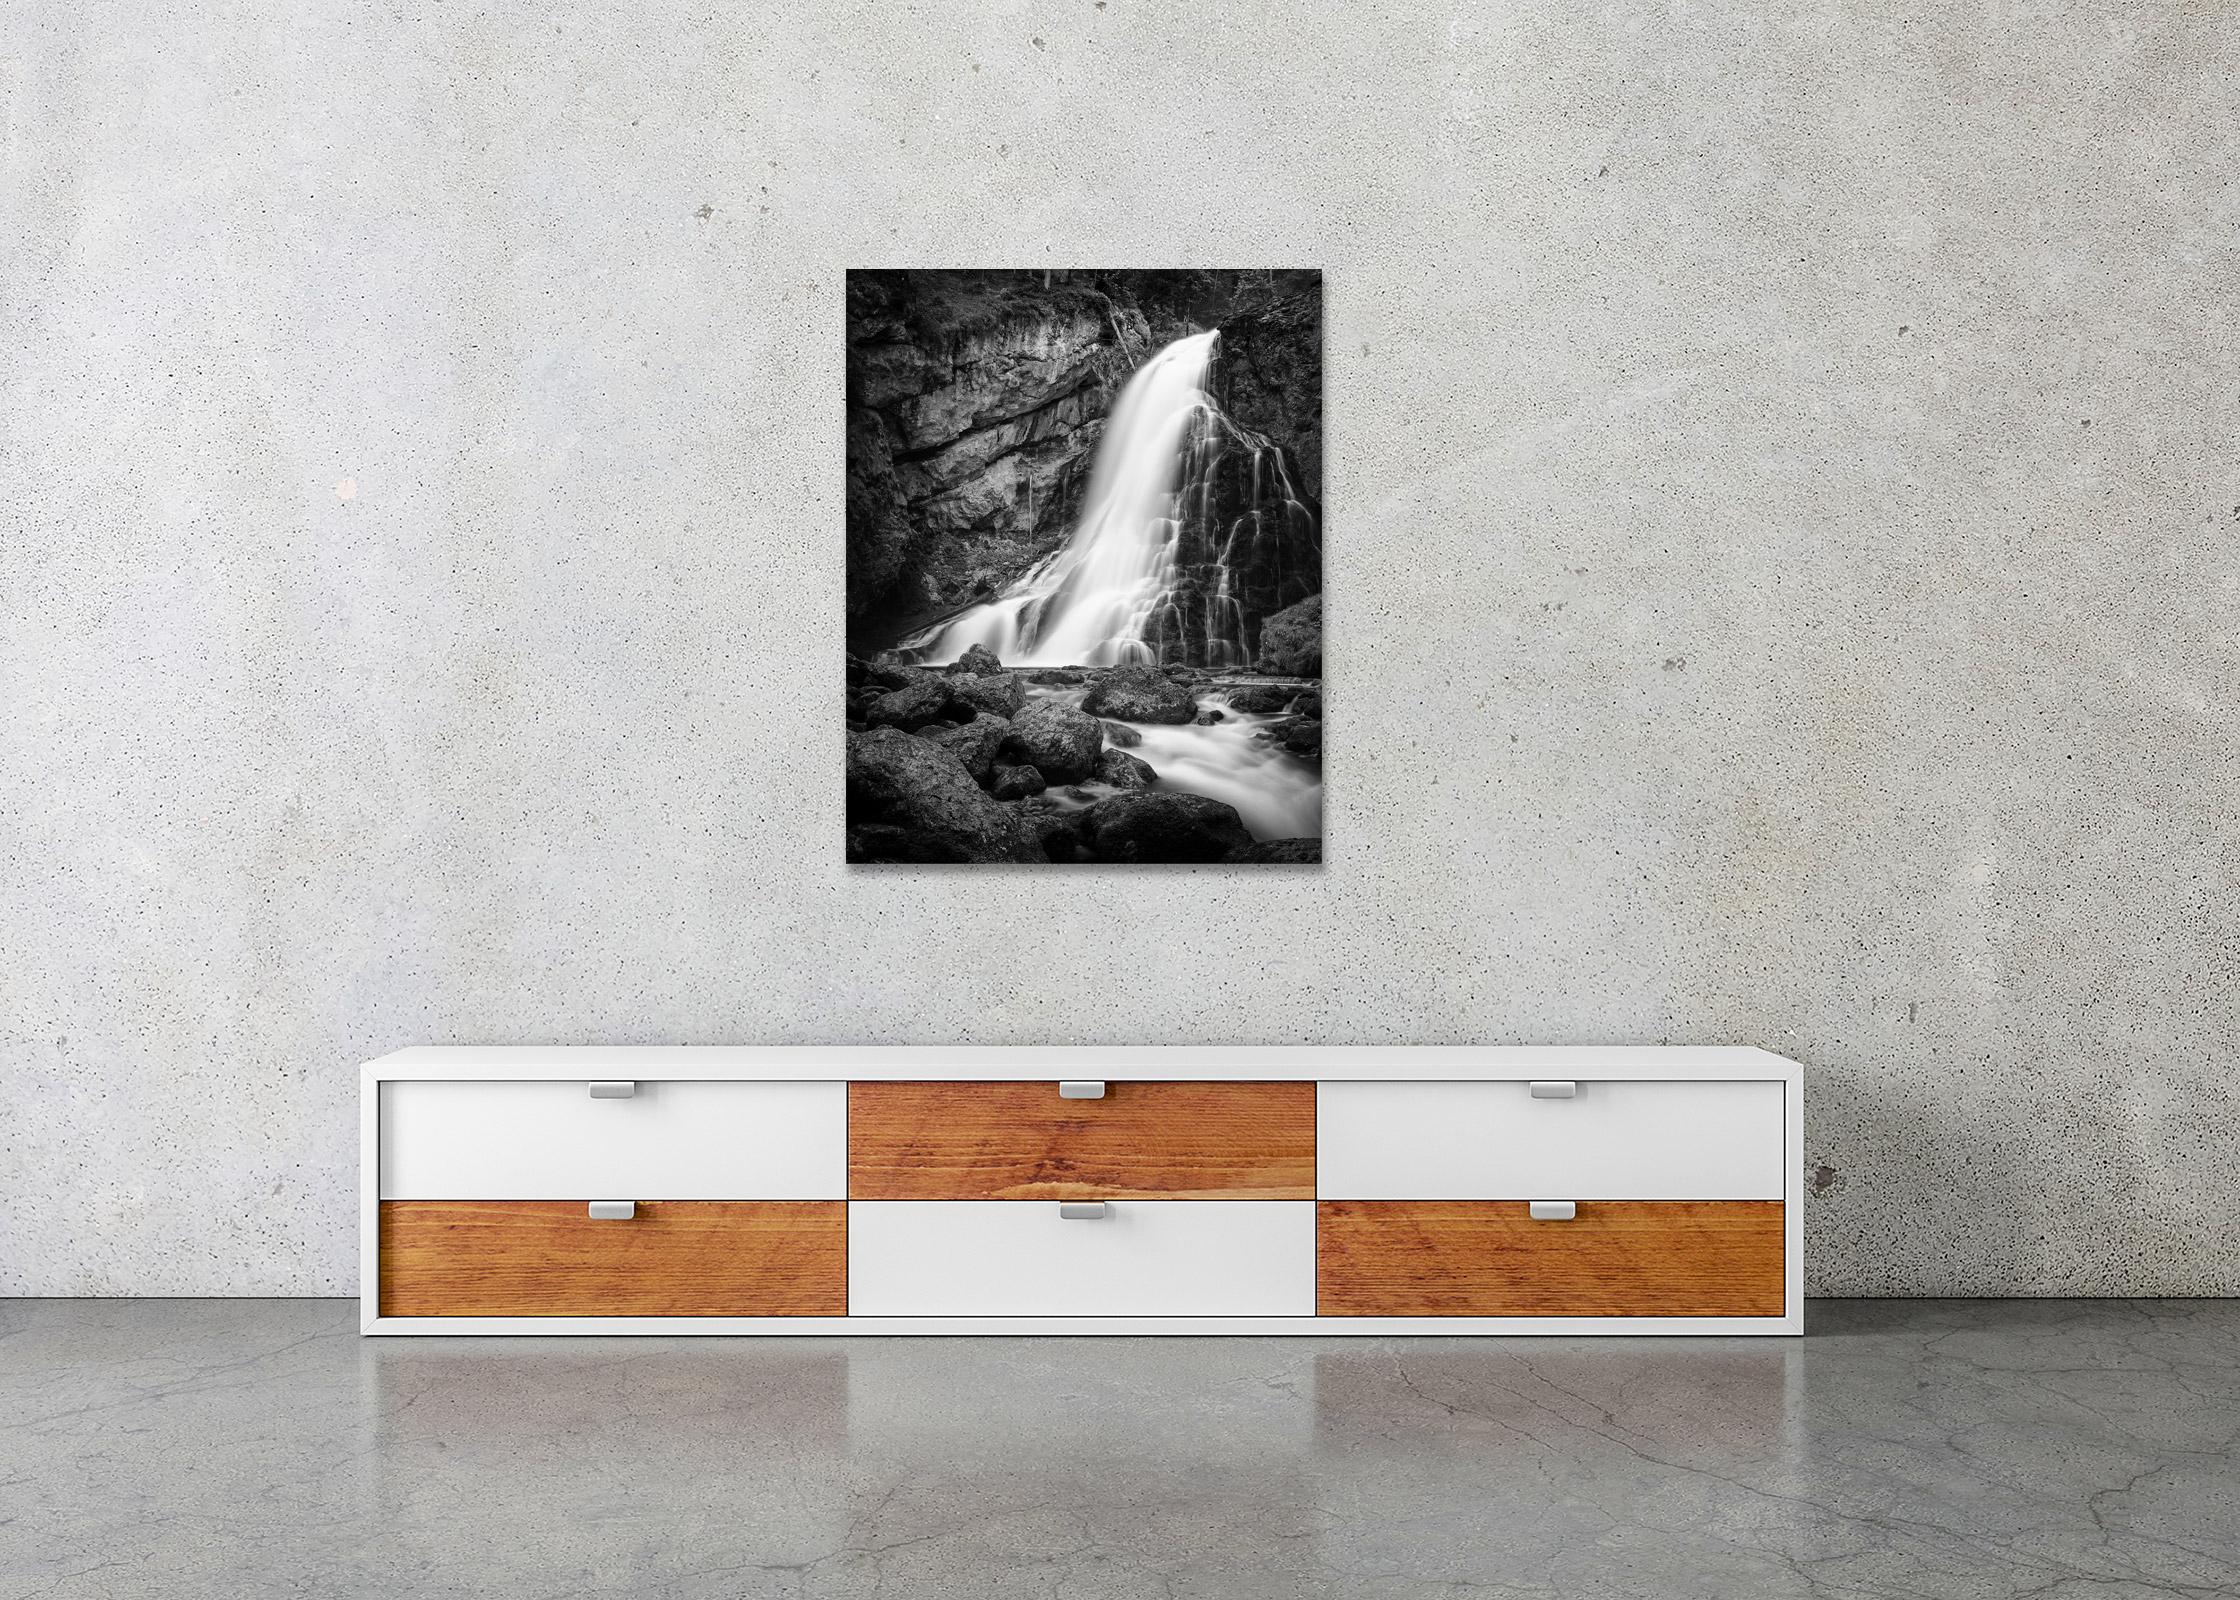 Black and white fine art long exposure waterscape - landscape photography. Archival pigment ink print as part of a limited edition of 5. All Gerald Berghammer prints are made to order in limited editions on Hahnemuehle Photo Rag Baryta. Each print